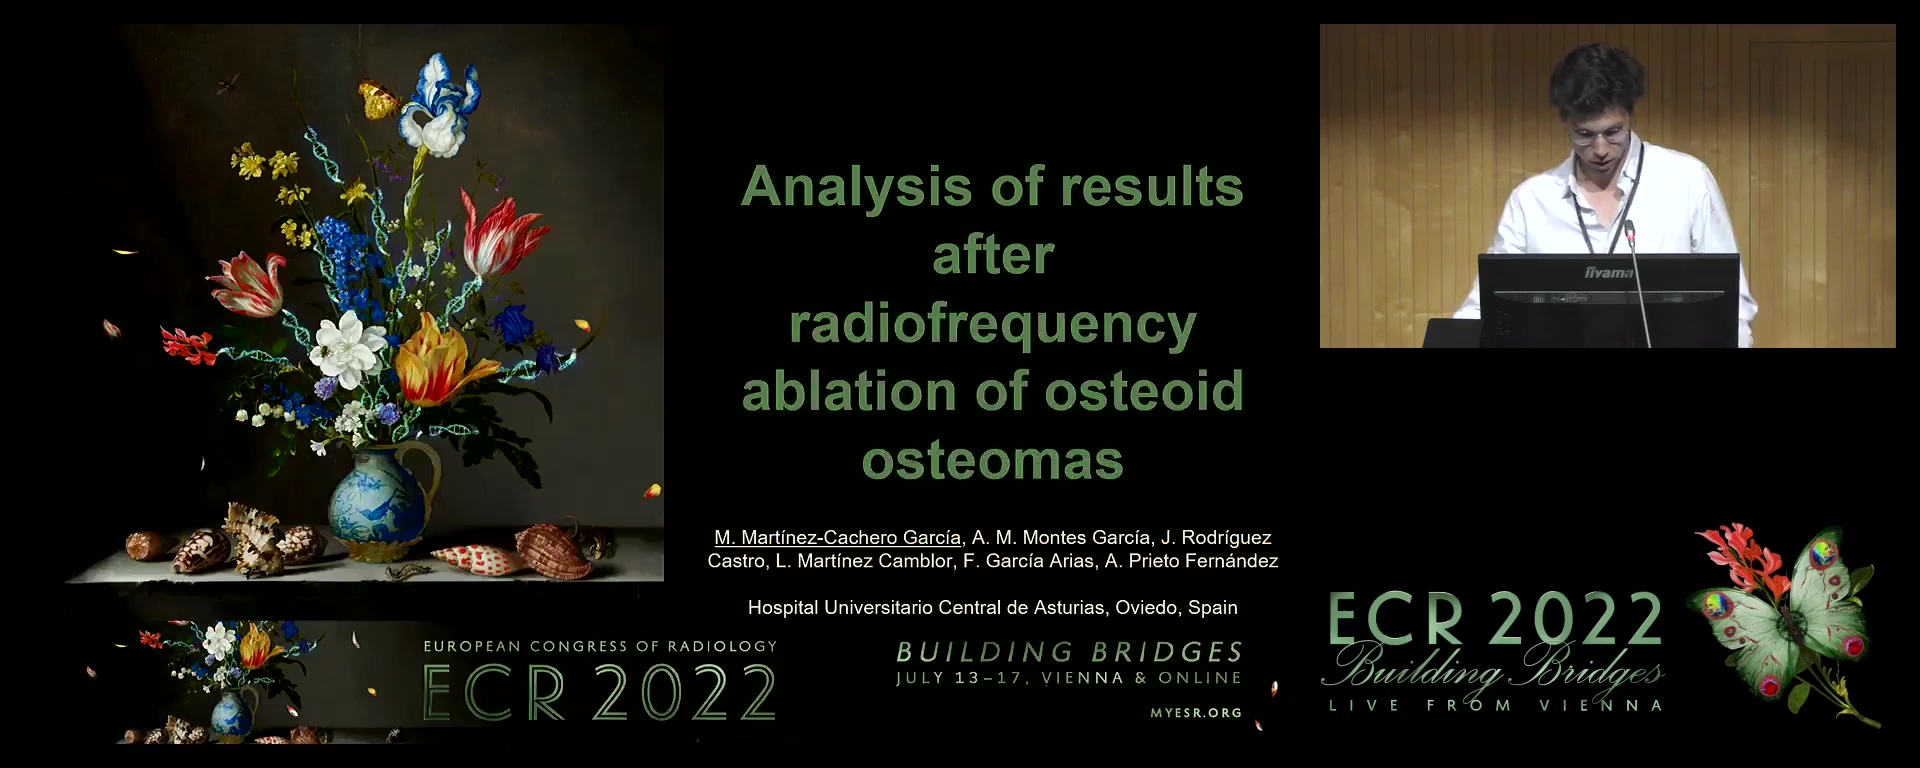 Analysis of results after radiofrequency ablation of osteoid osteomas